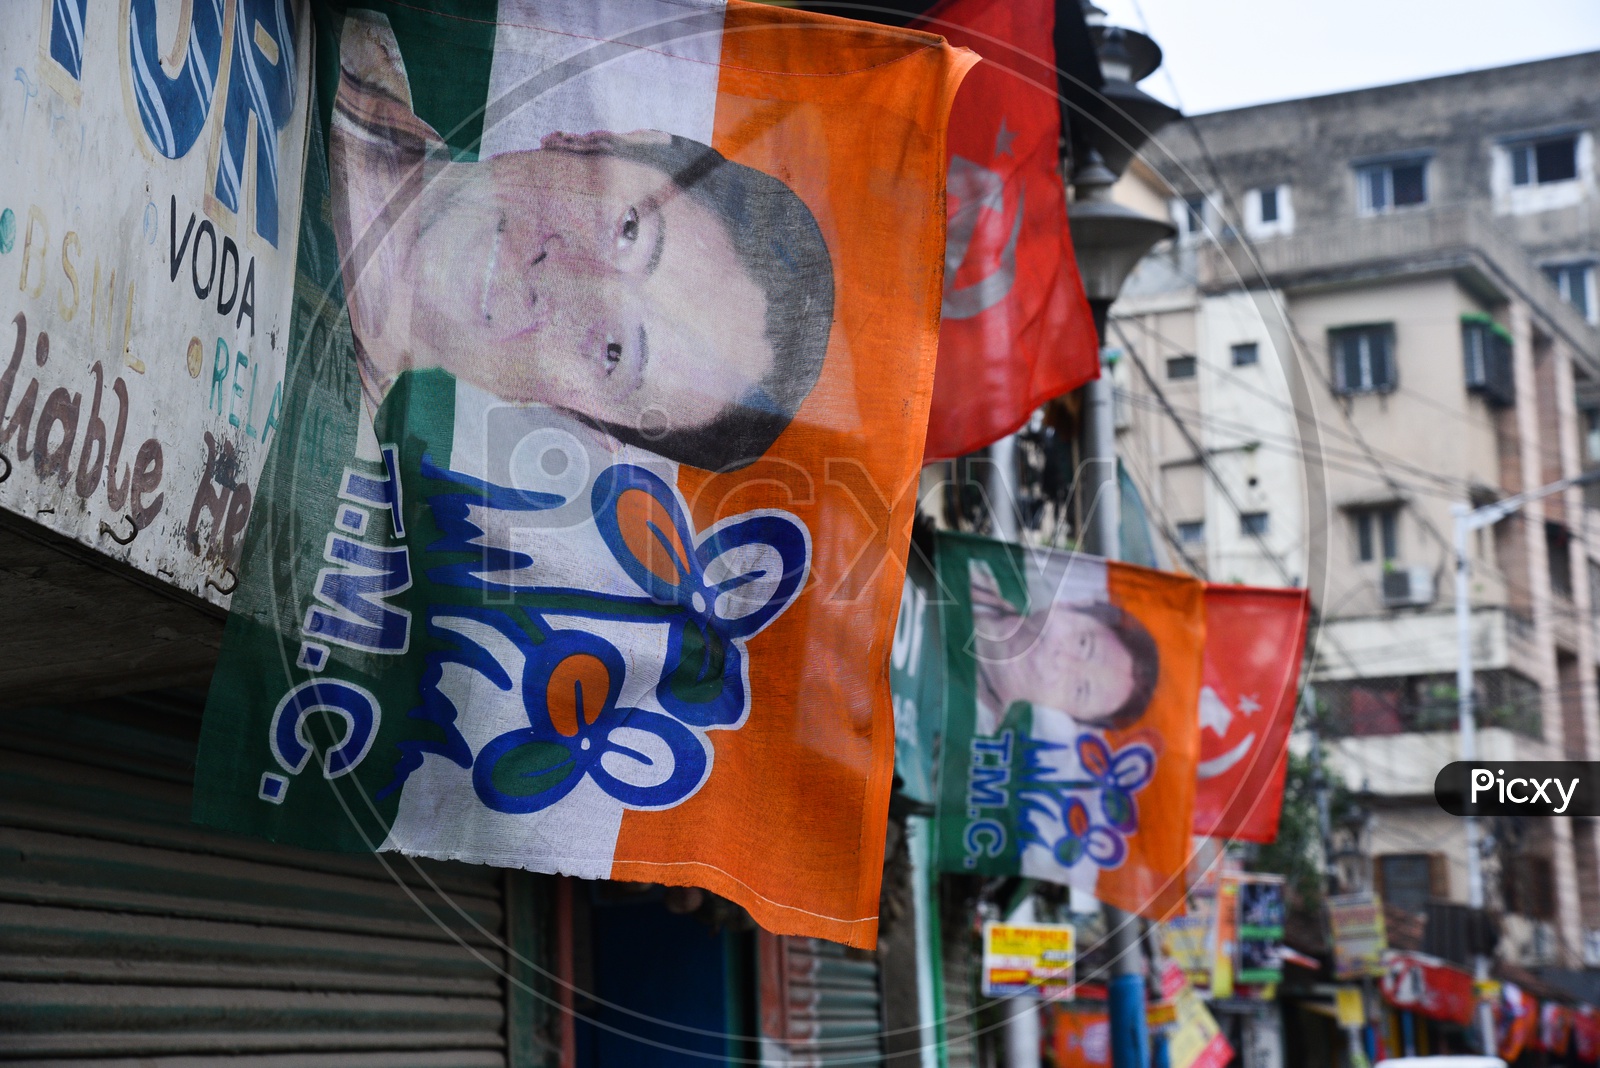 Trinamool Congress  ( TMC )  And Mamata Benerjee Flags Tagged  in City  As a  Part Of Election Campaign In Kolkata City